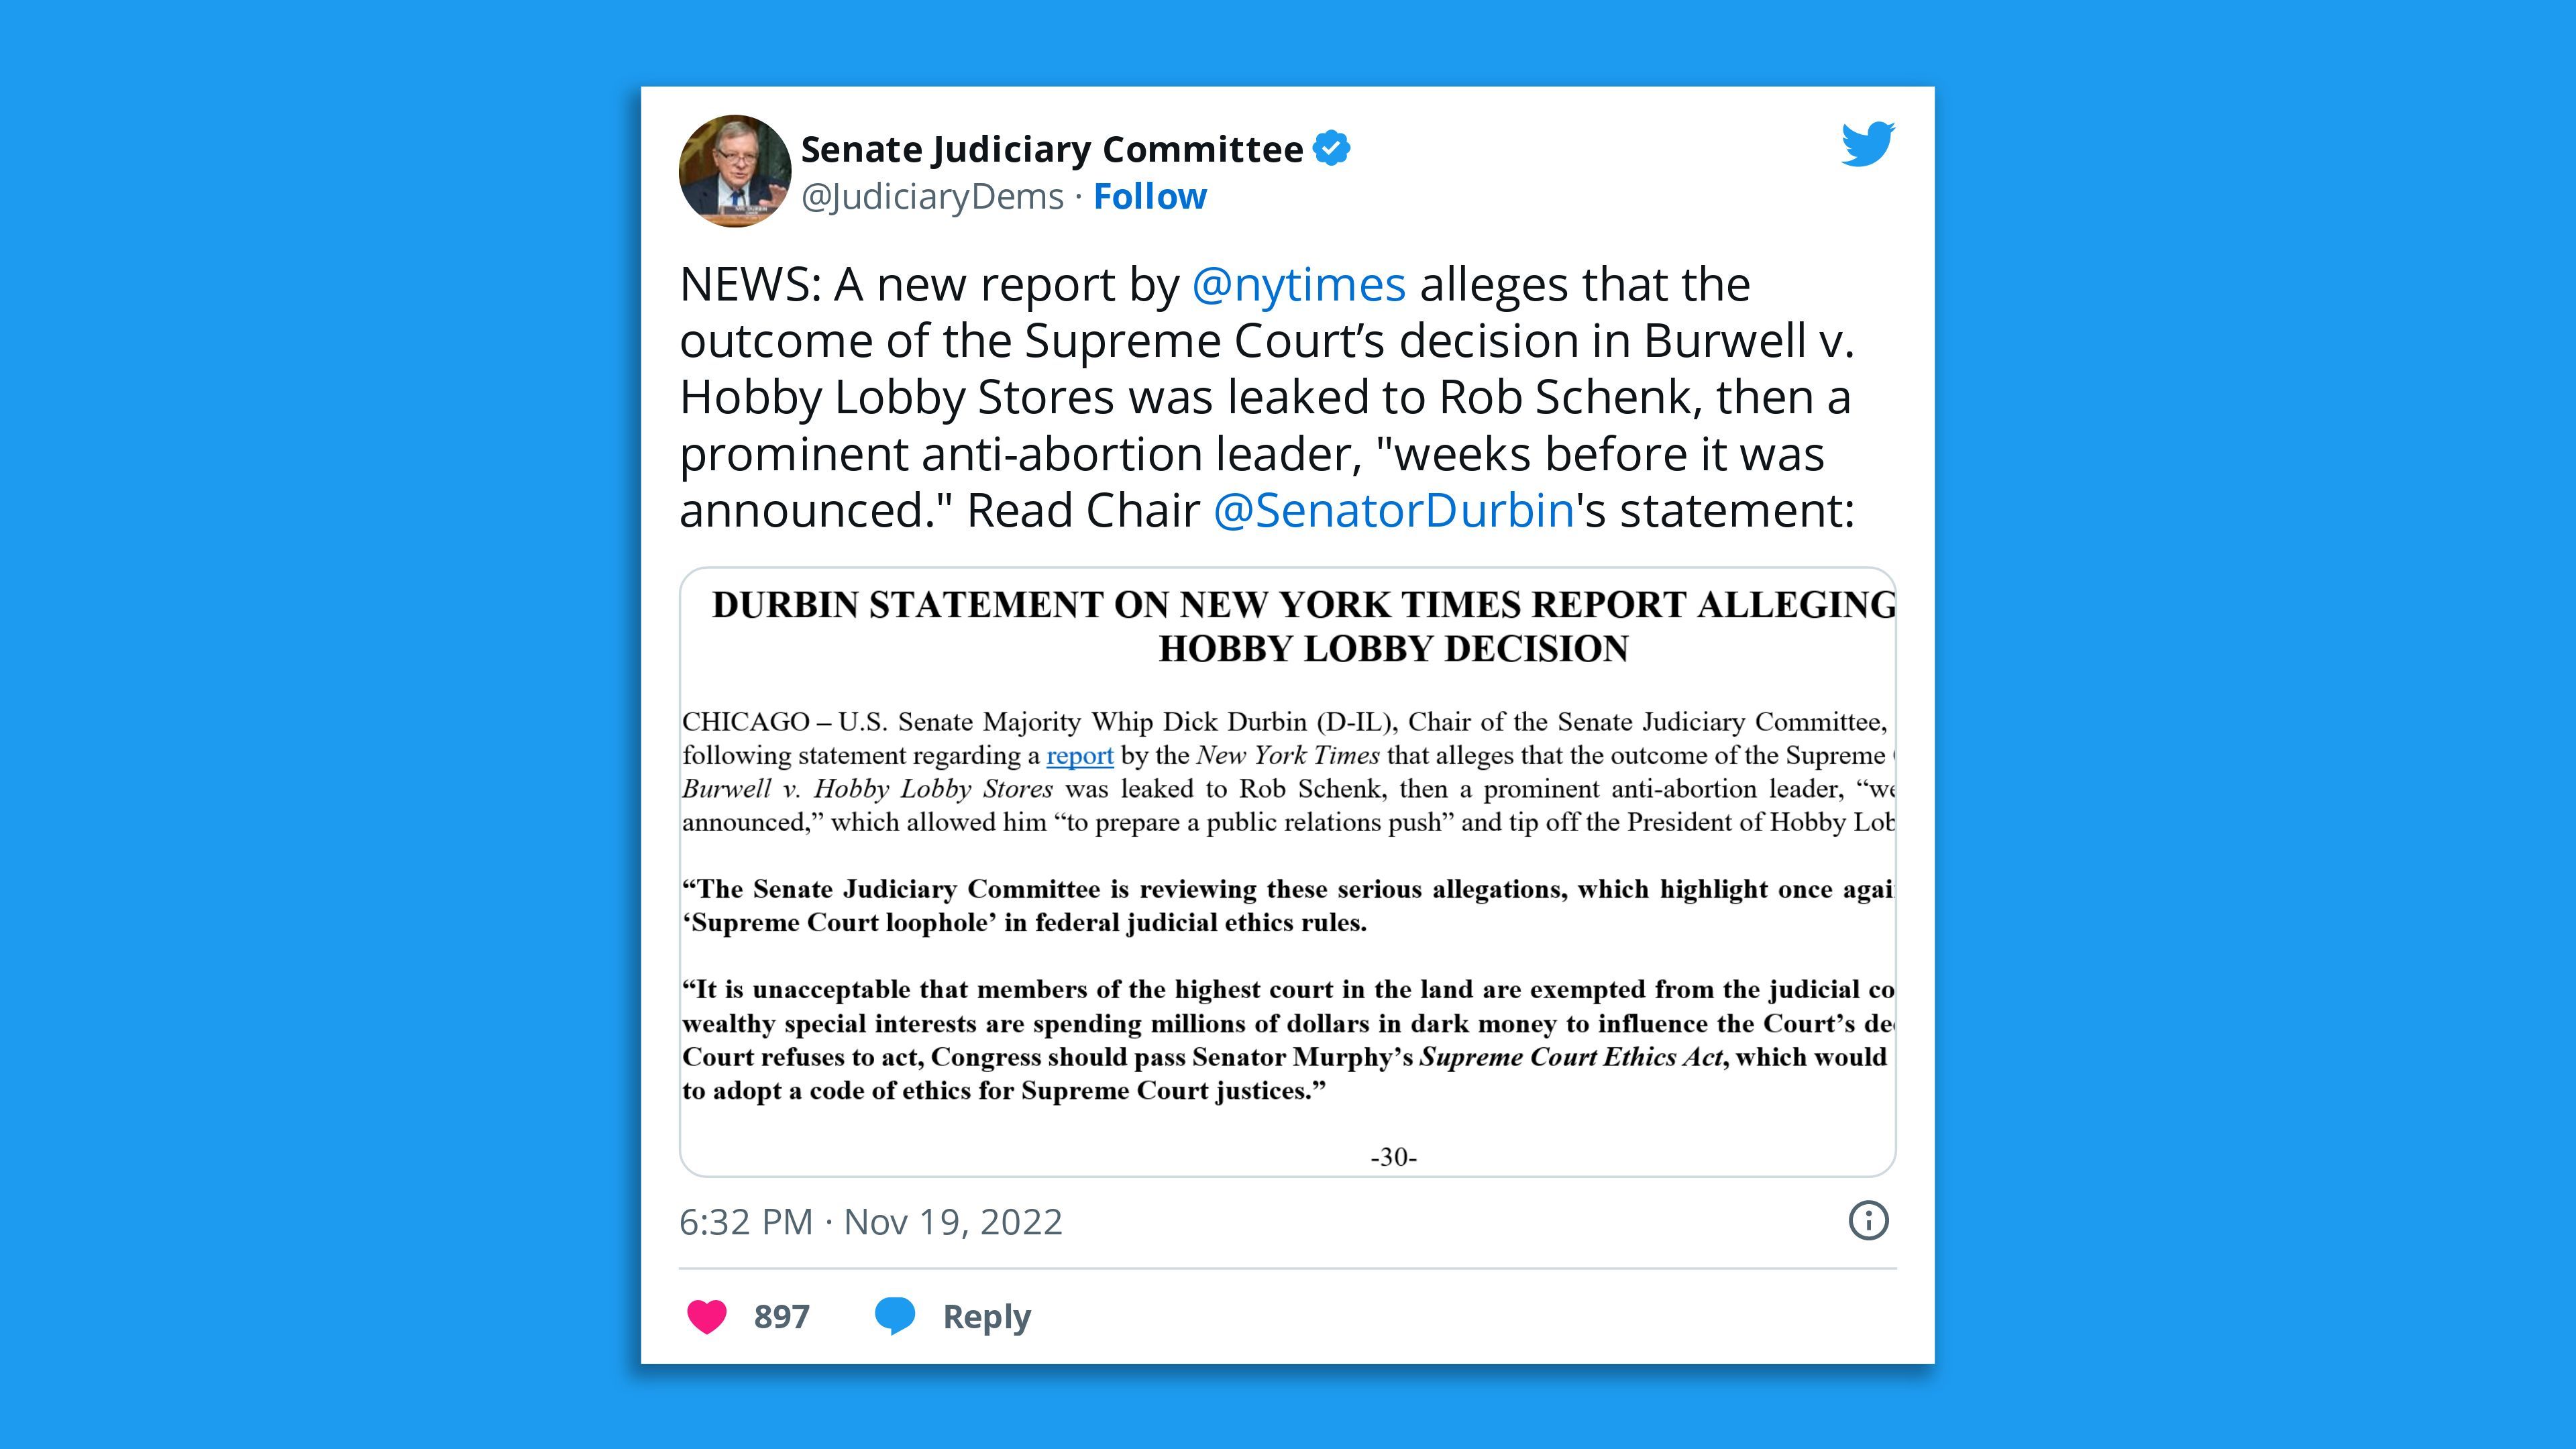 A screenshot of a tweet by a Senate Judiciary Committee announcing it is reviewing allegations of leaking a 2014 Supreme Court ruling weeks in advance.